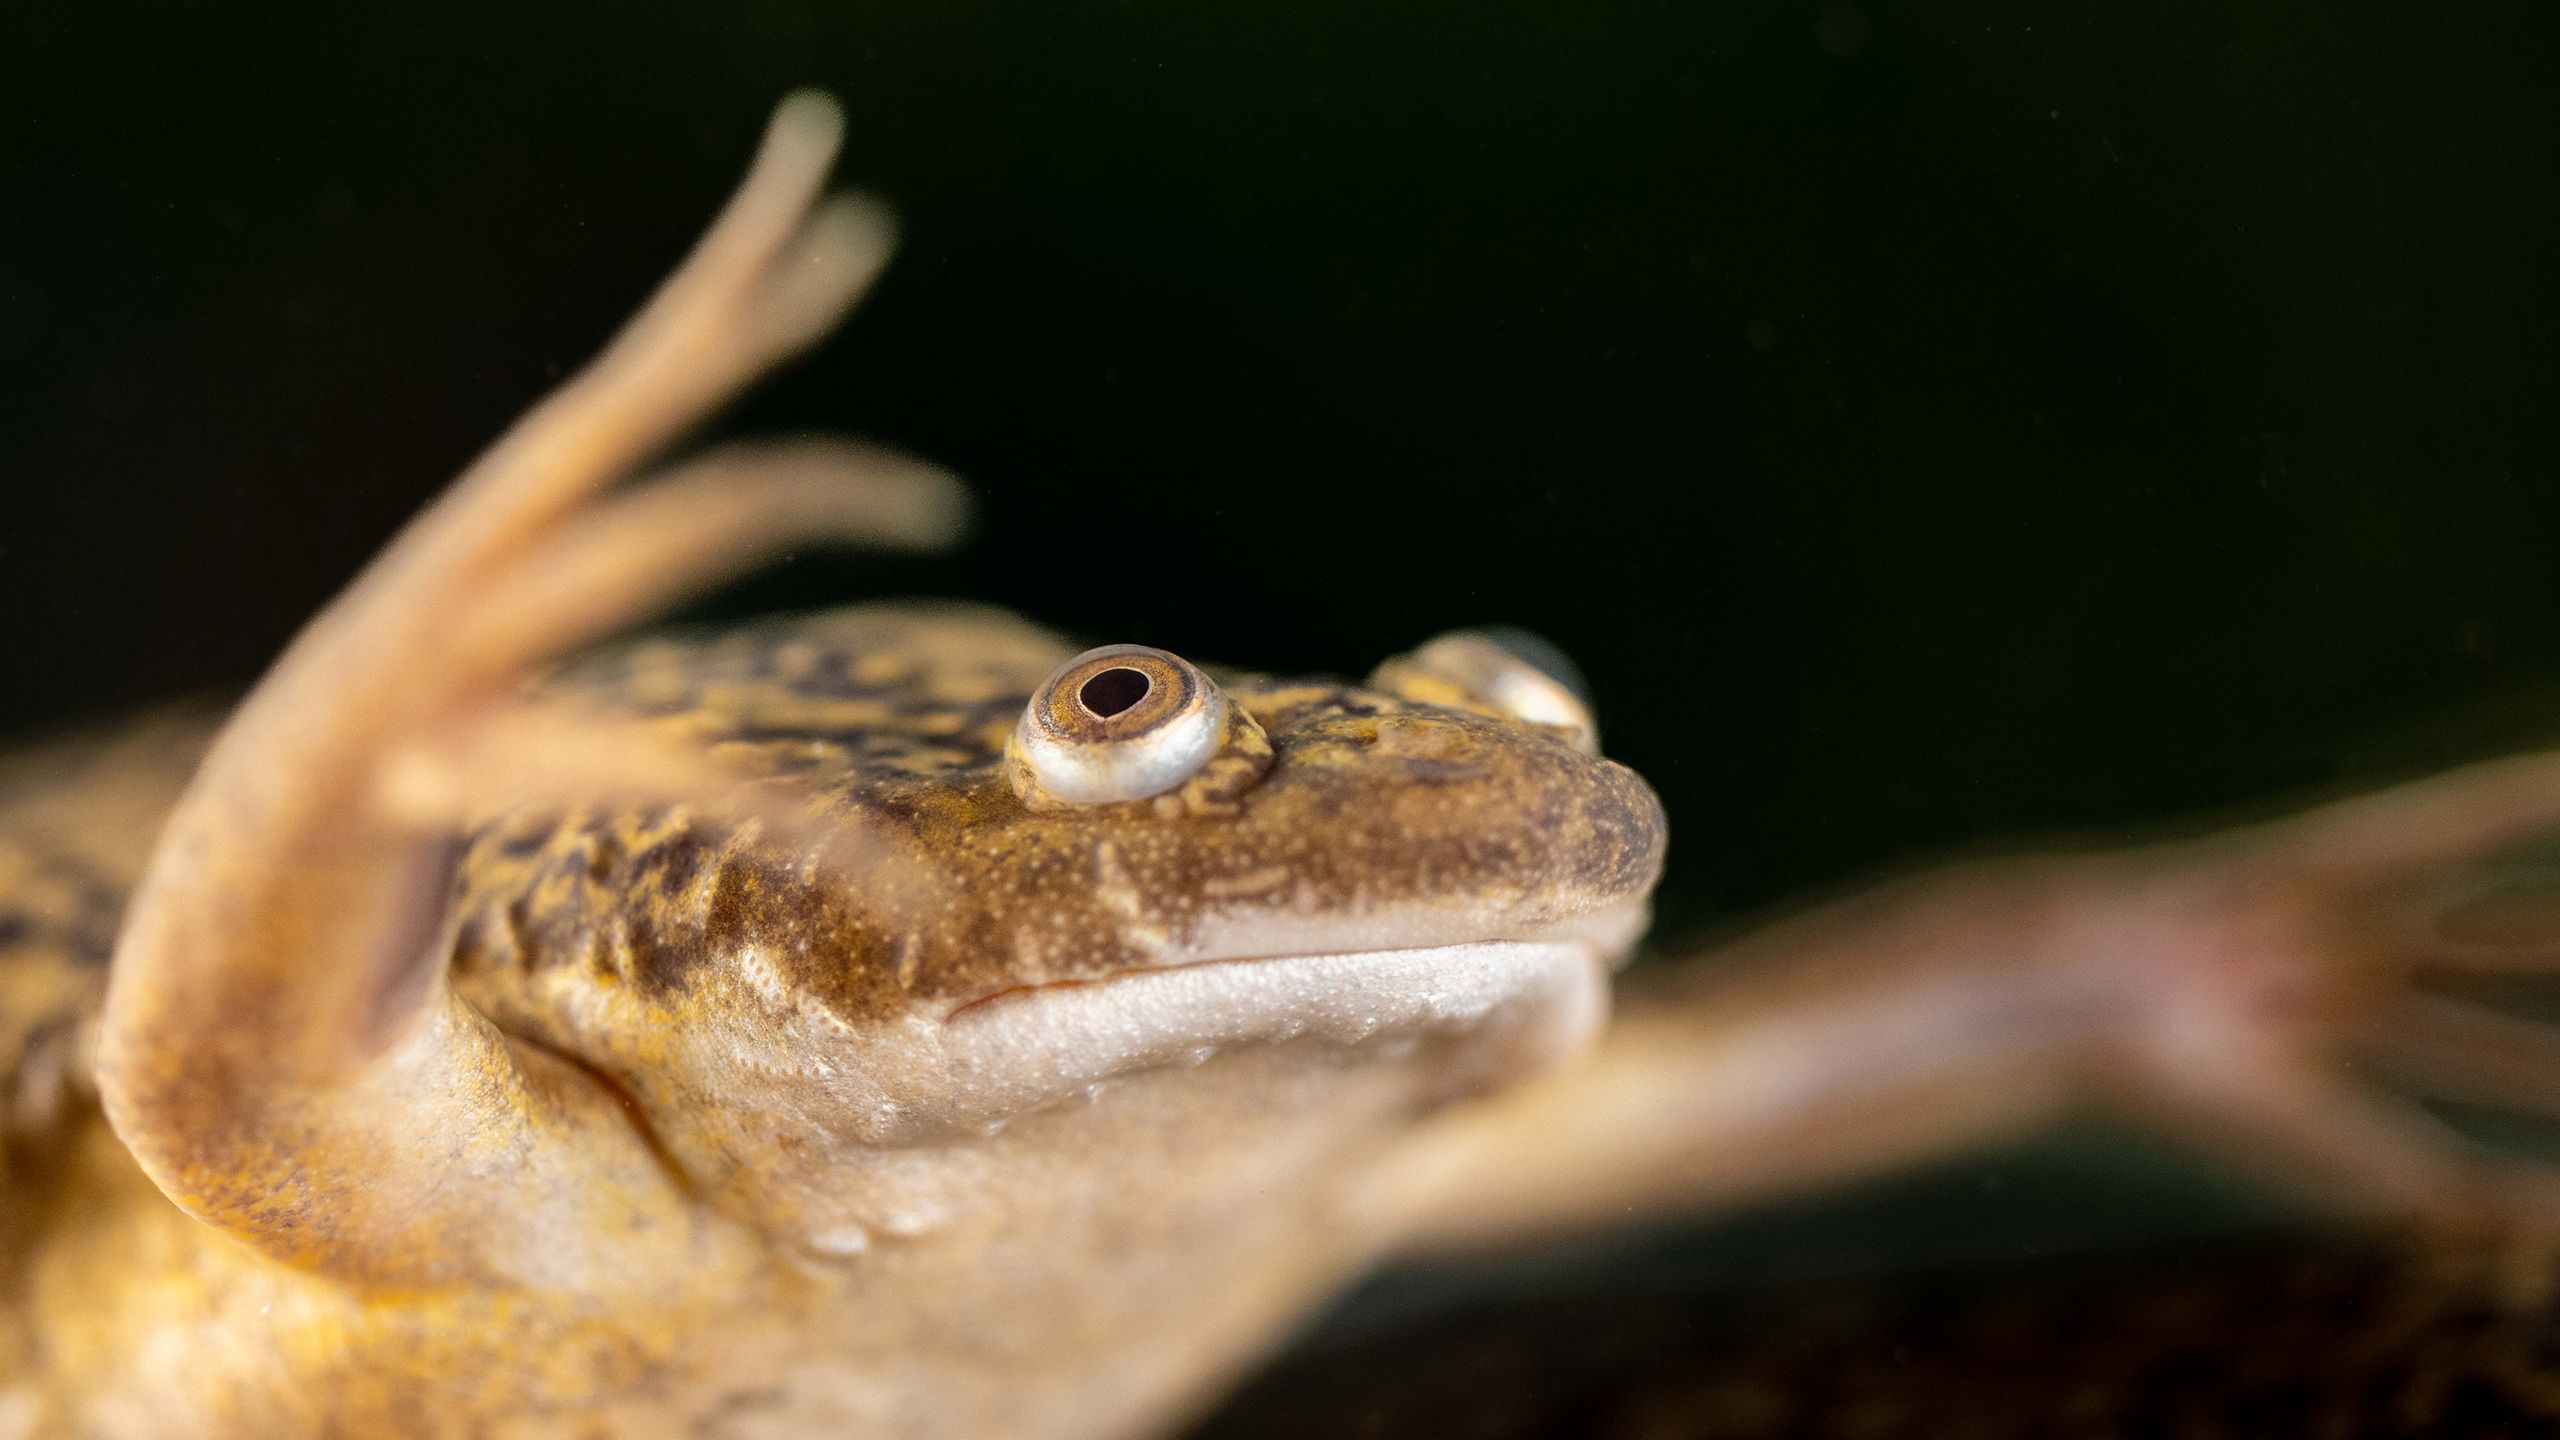 Adult African Clawed Frog